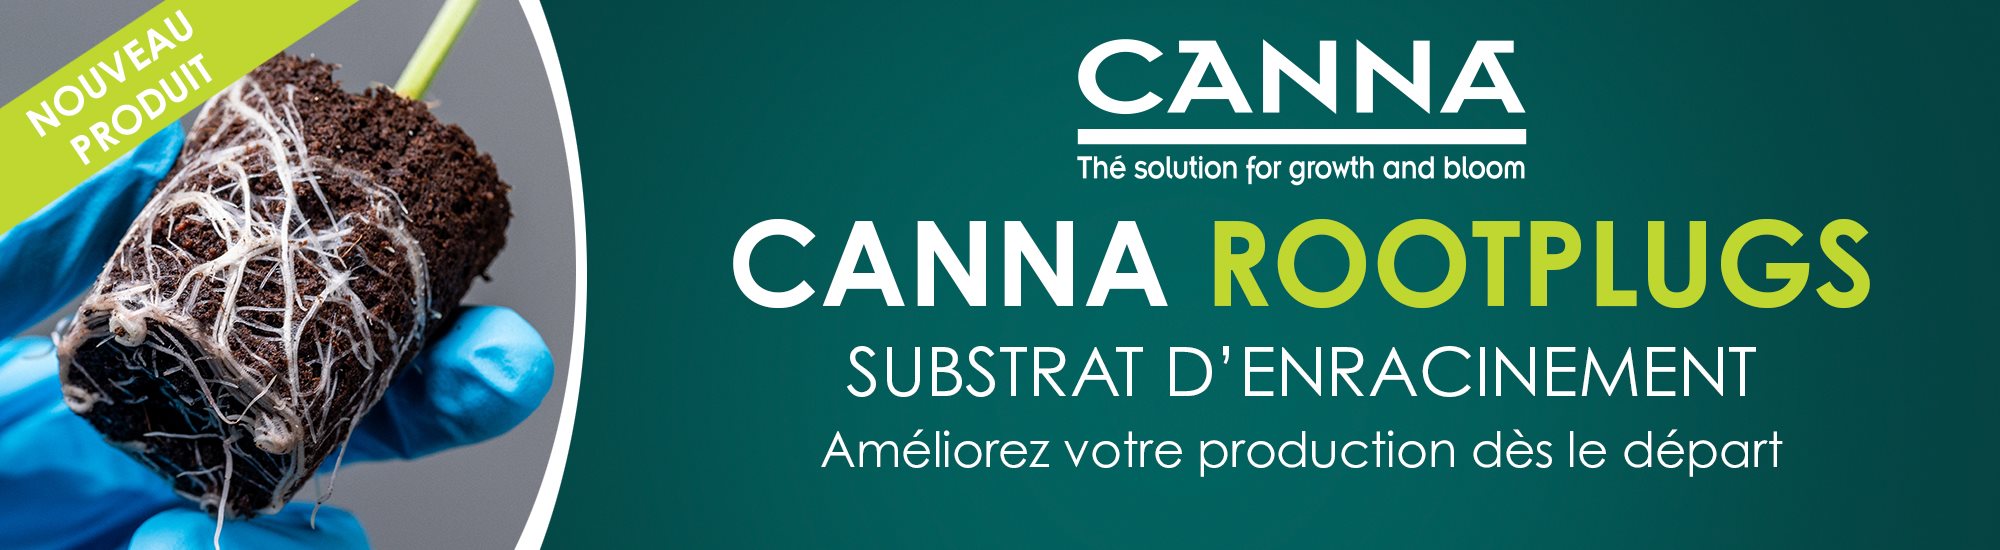 CANNA ROOTPLUGS WEB BANNER - FR